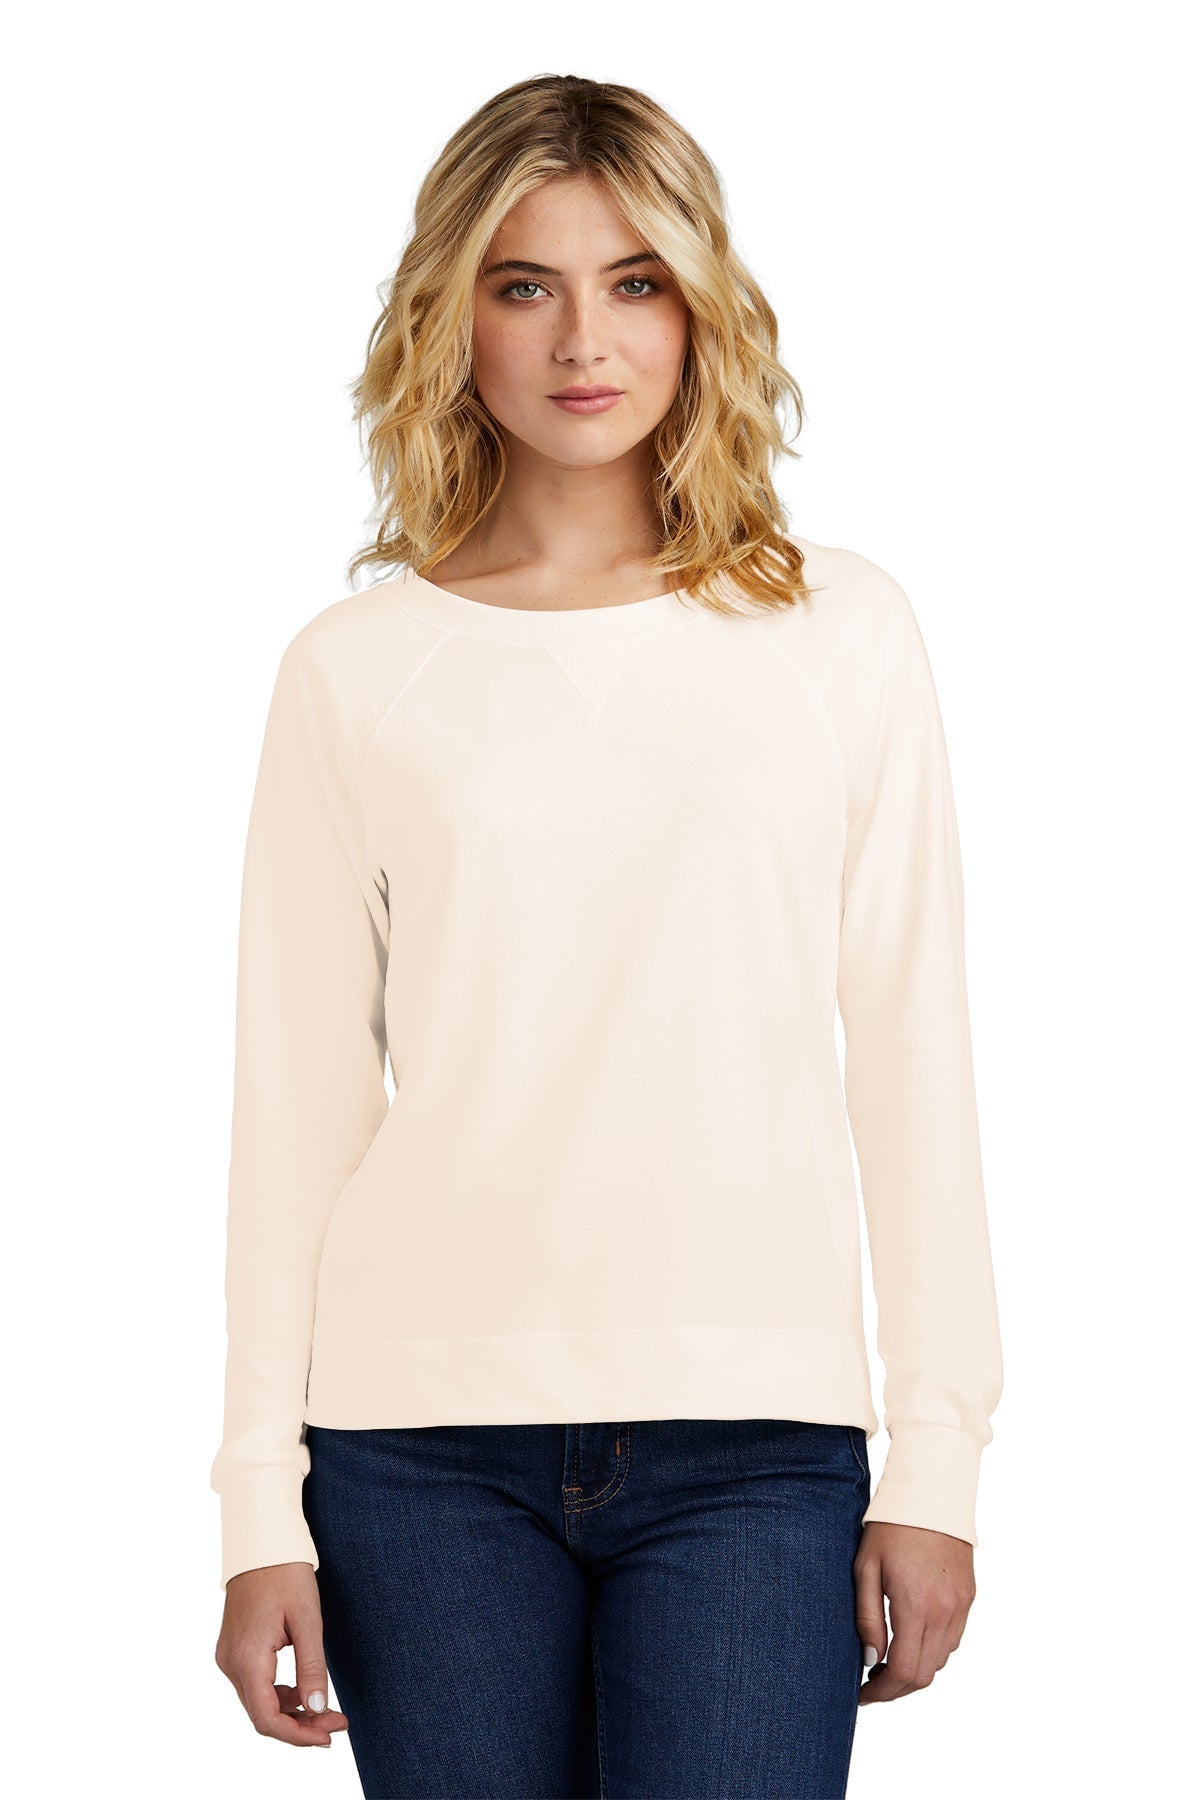 DT672 District® Women’s Featherweight French Terry™ Long Sleeve Crewneck